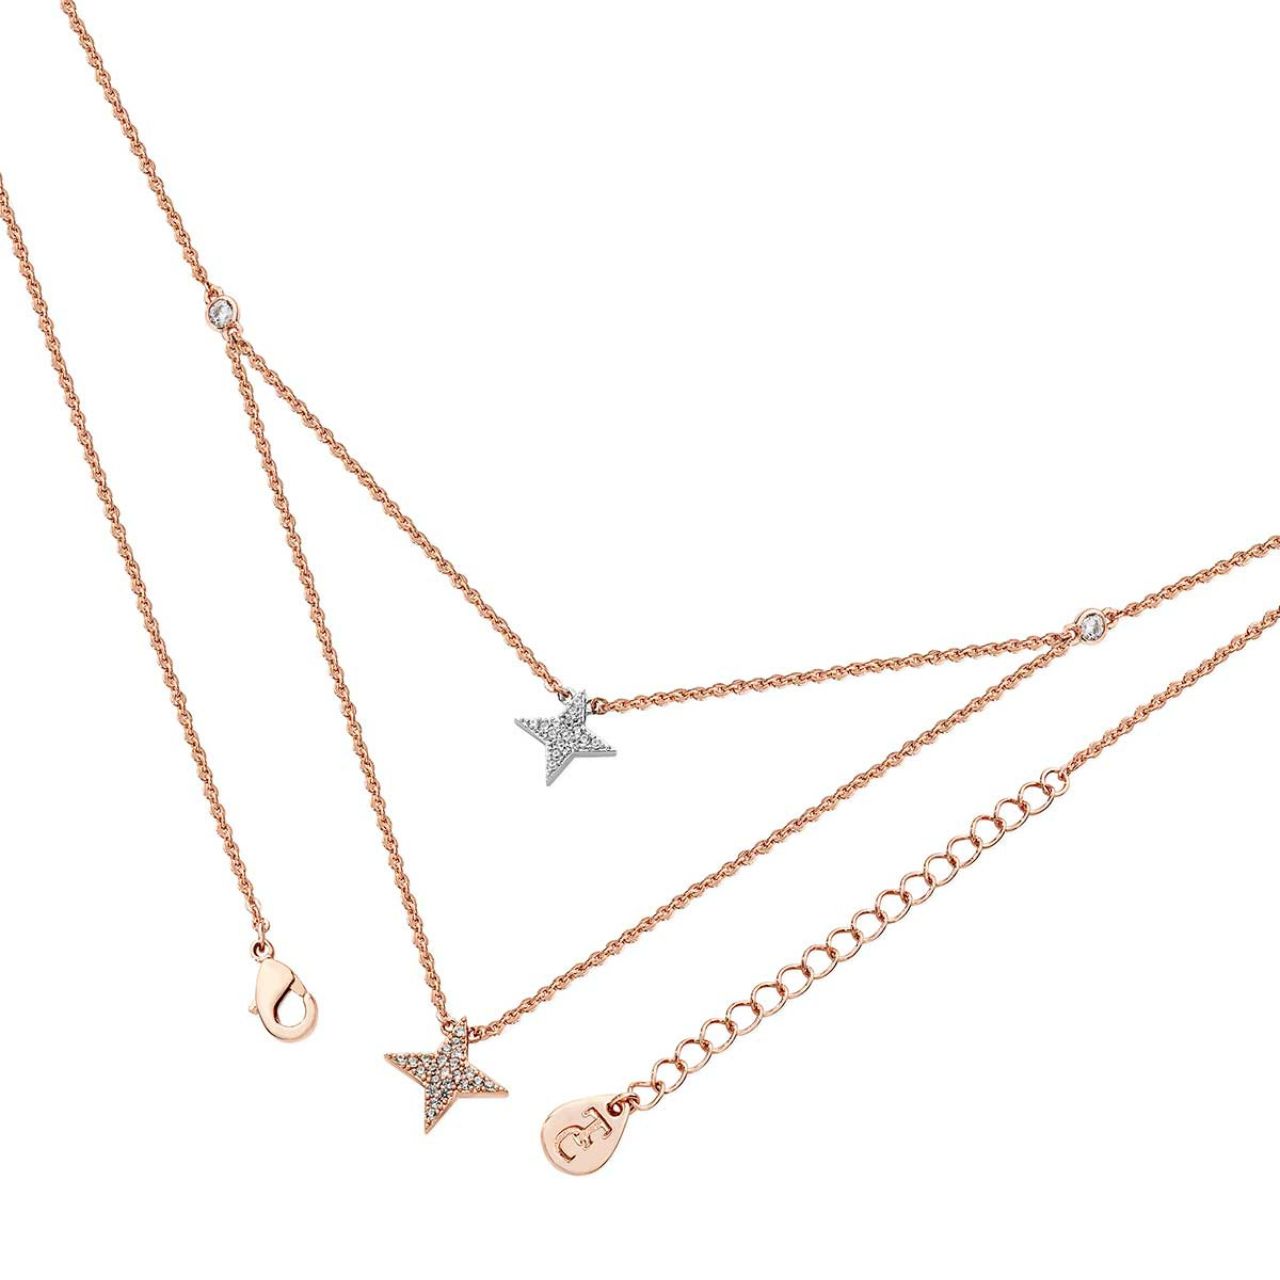 Double Floating Pave Star Necklace Rose Gold by Tipperary  This time round the double floating necklace has a rose gold chain and effectively mixes with a silver inner star pendant. Both stars are inset with cz’s in a páve style. This is truly a stunning piece that will compliment any outfit.